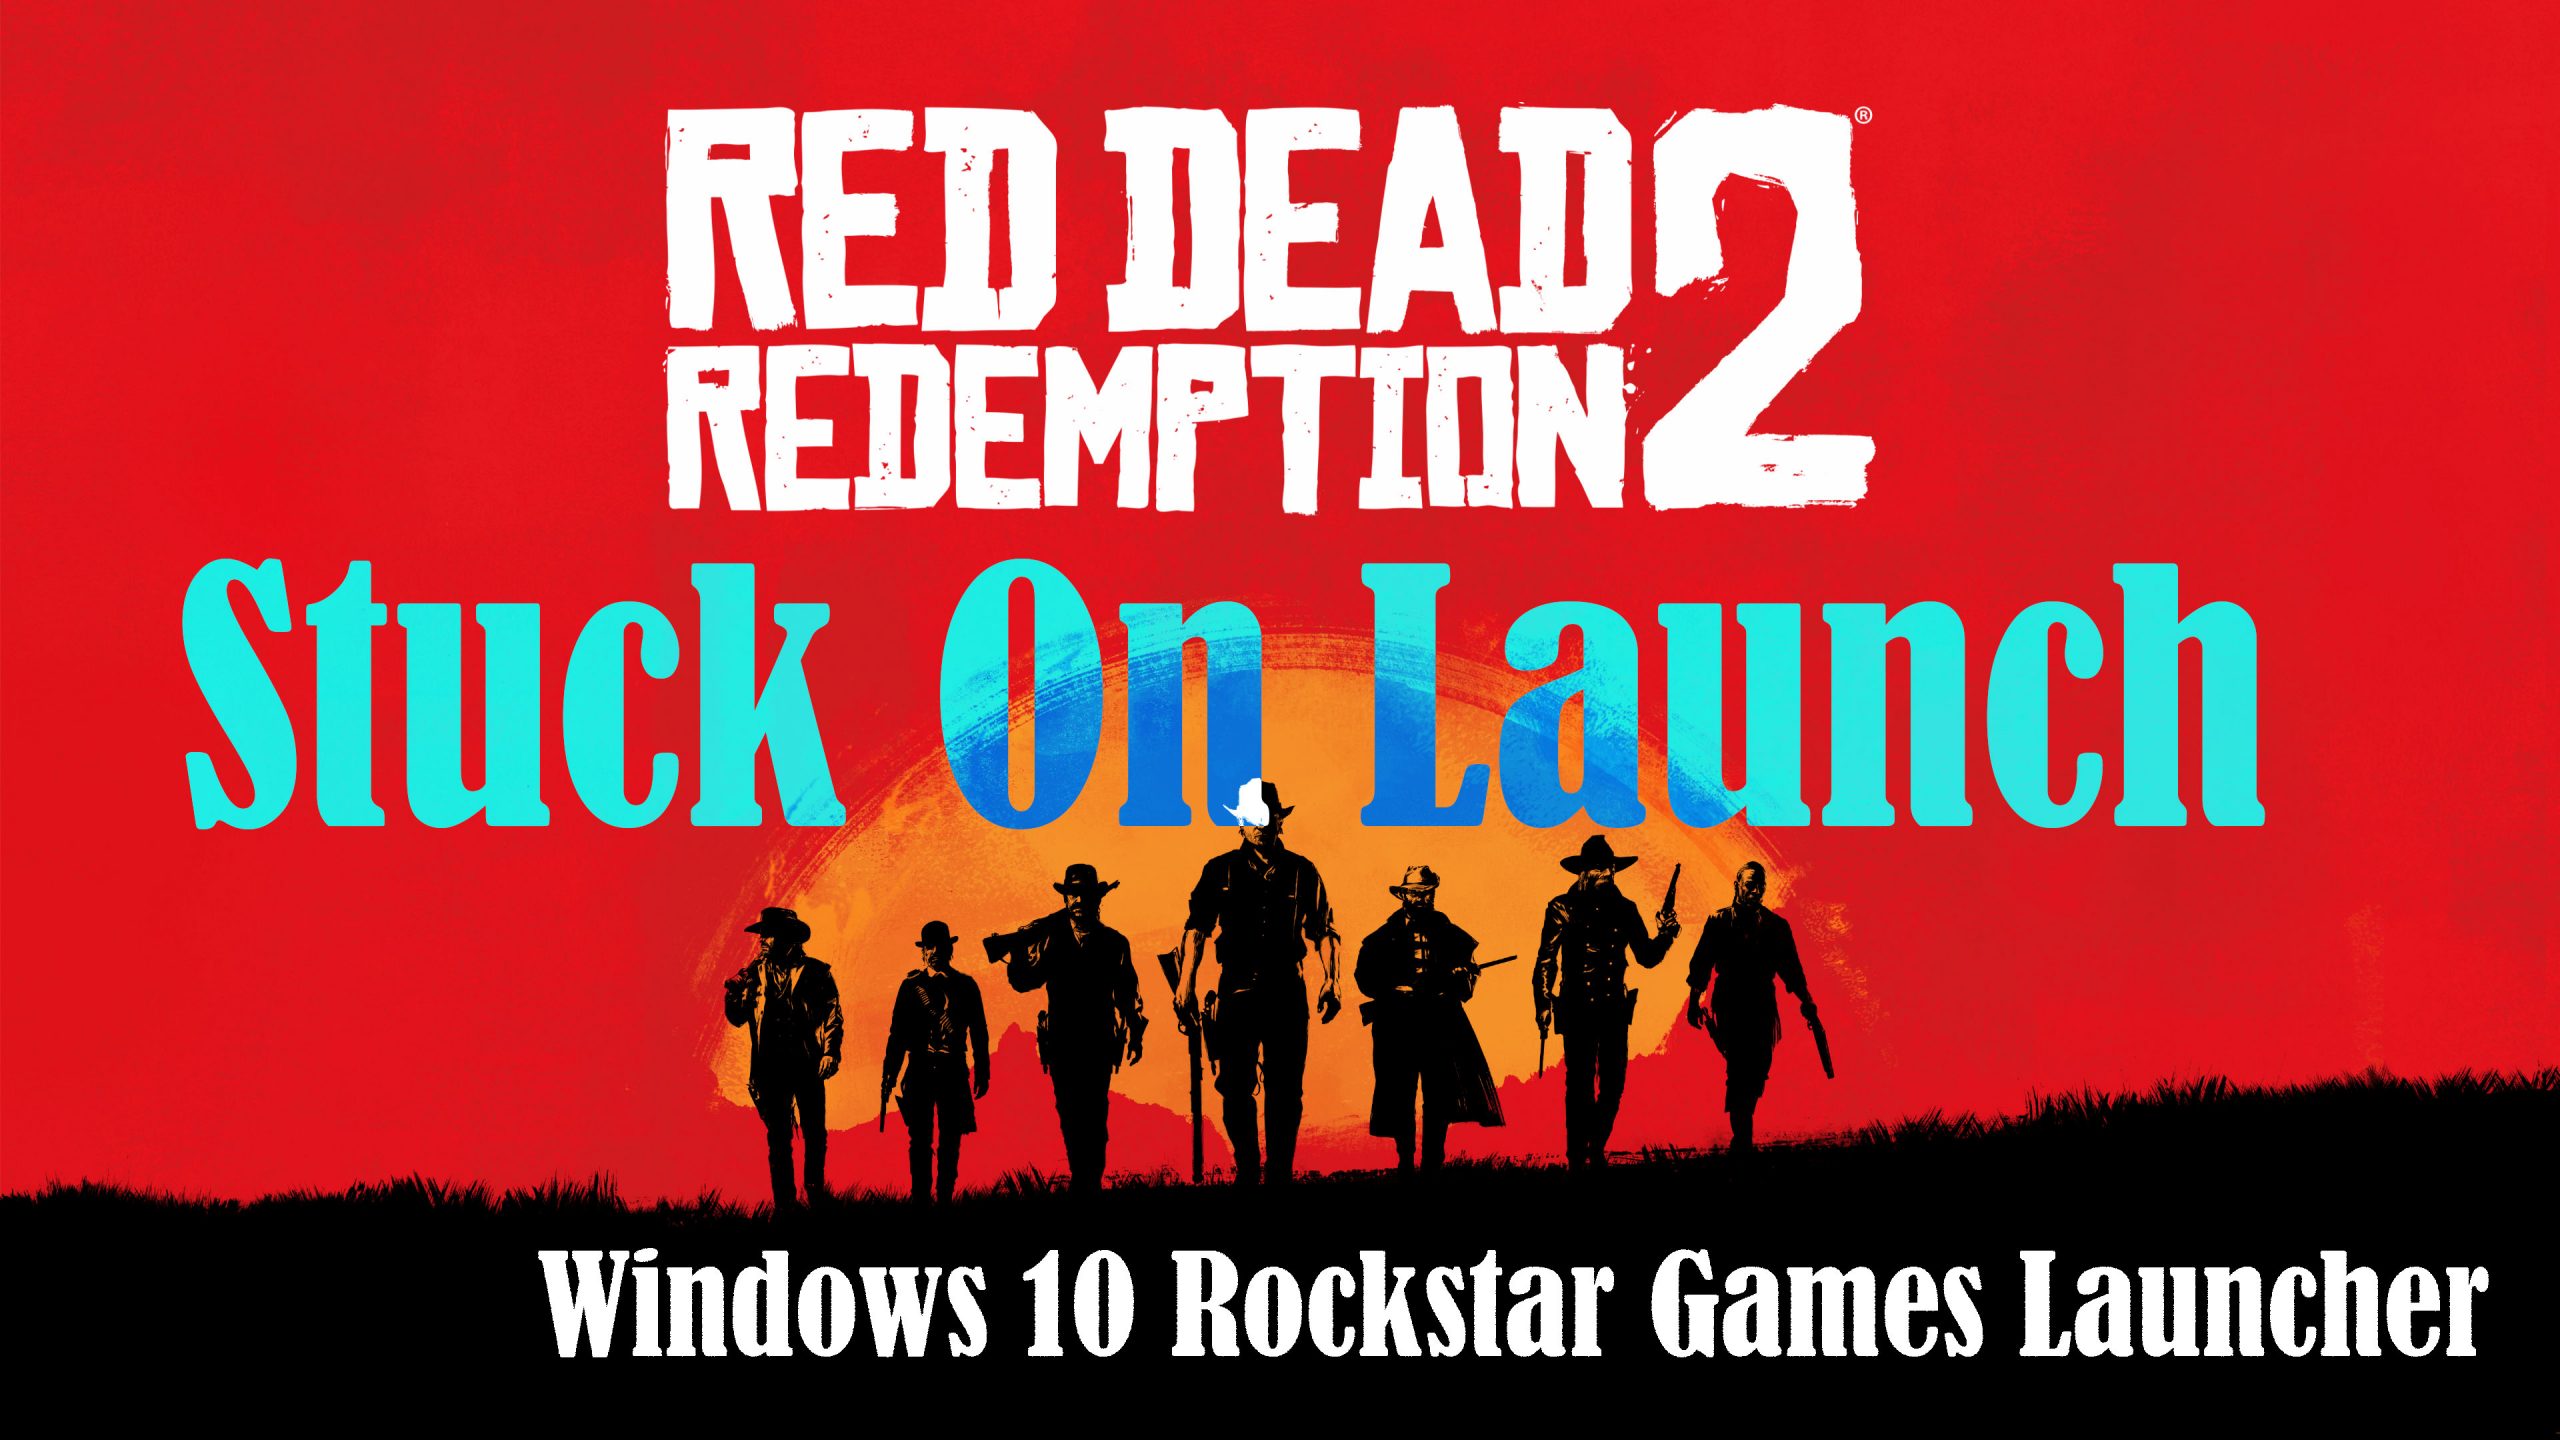 Rockstar Games Launcher Stuck on Loading, Know its Fixes - News